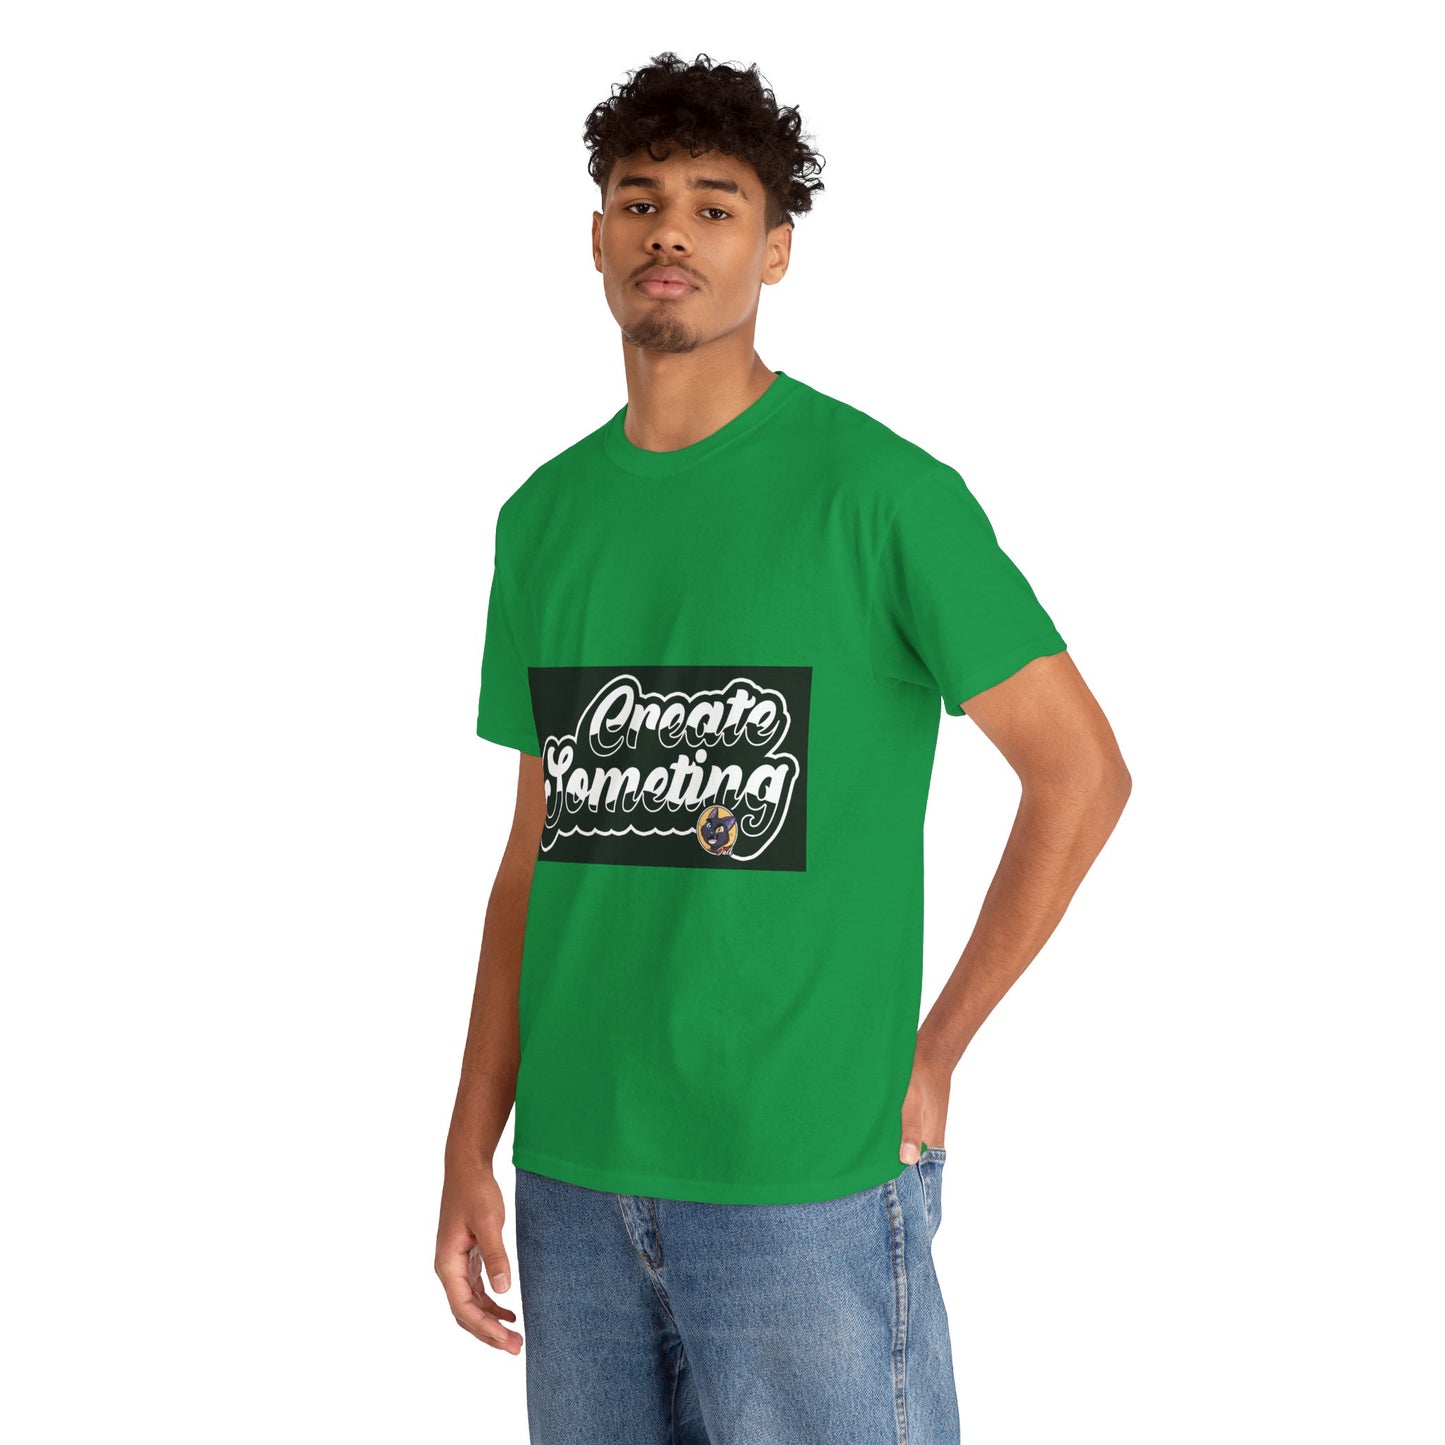 The Free Thinker T-Shirt: Created someting